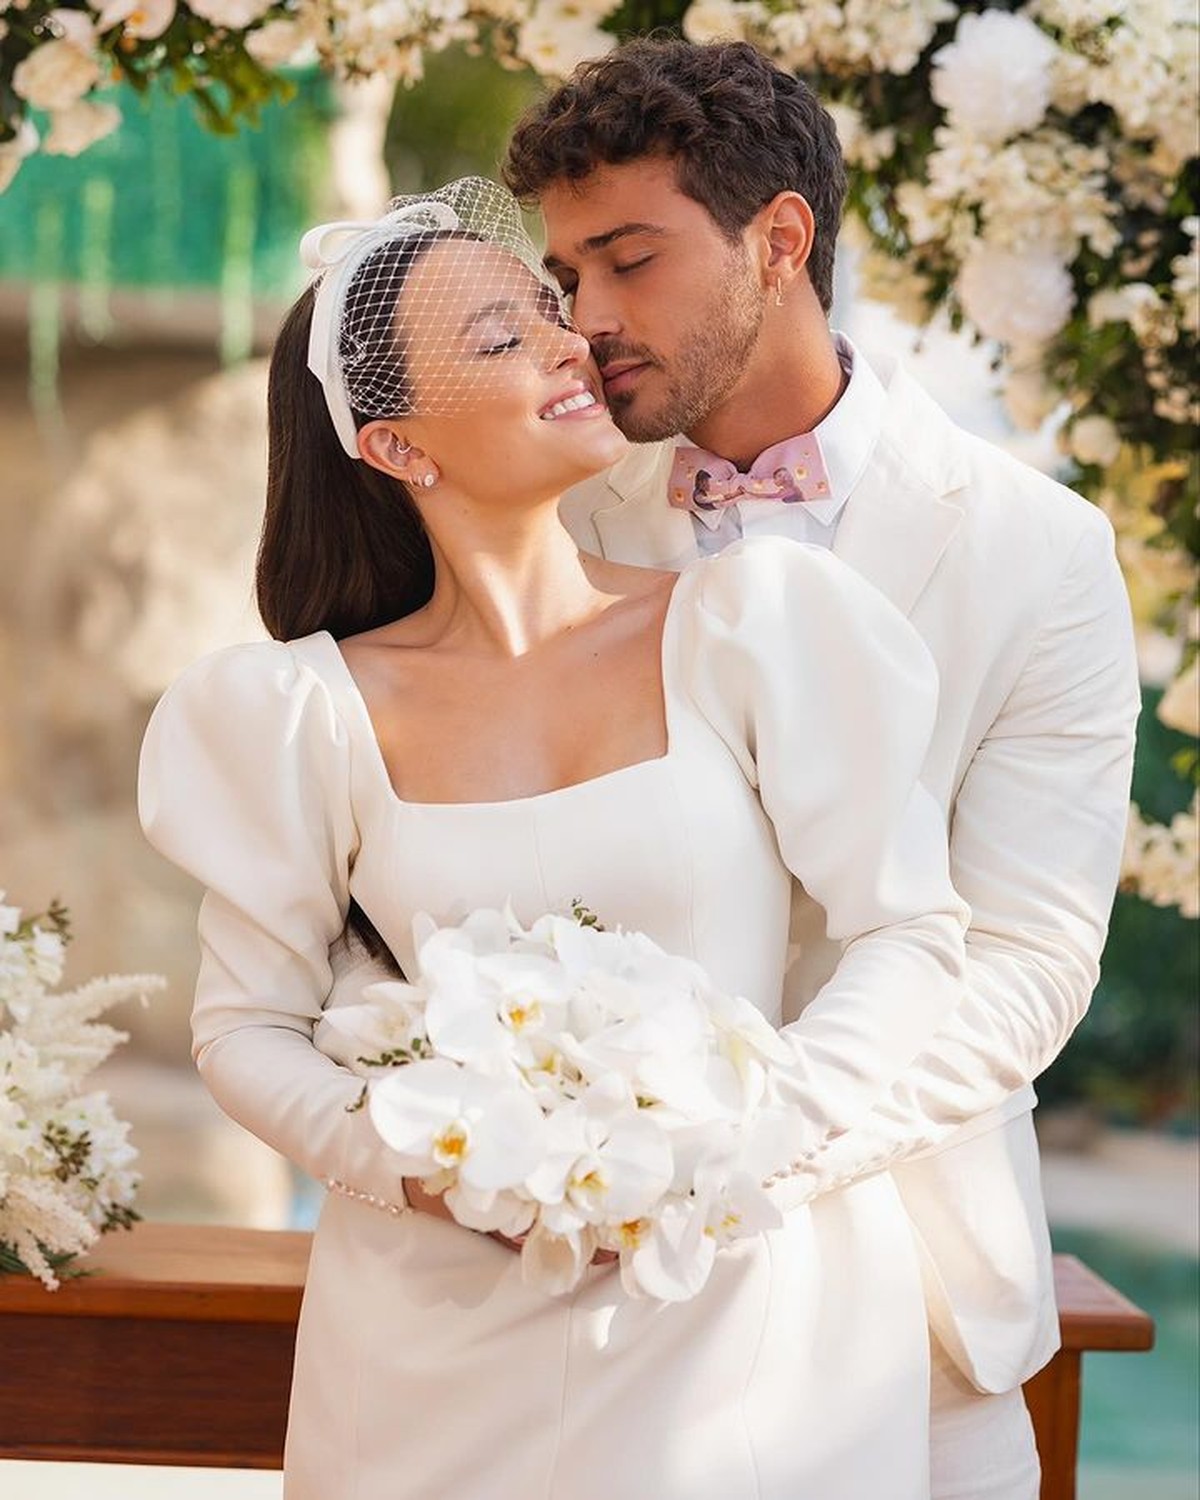 Larissa Manoela and André Luiz Frambach get married: ‘Simply meant to be’